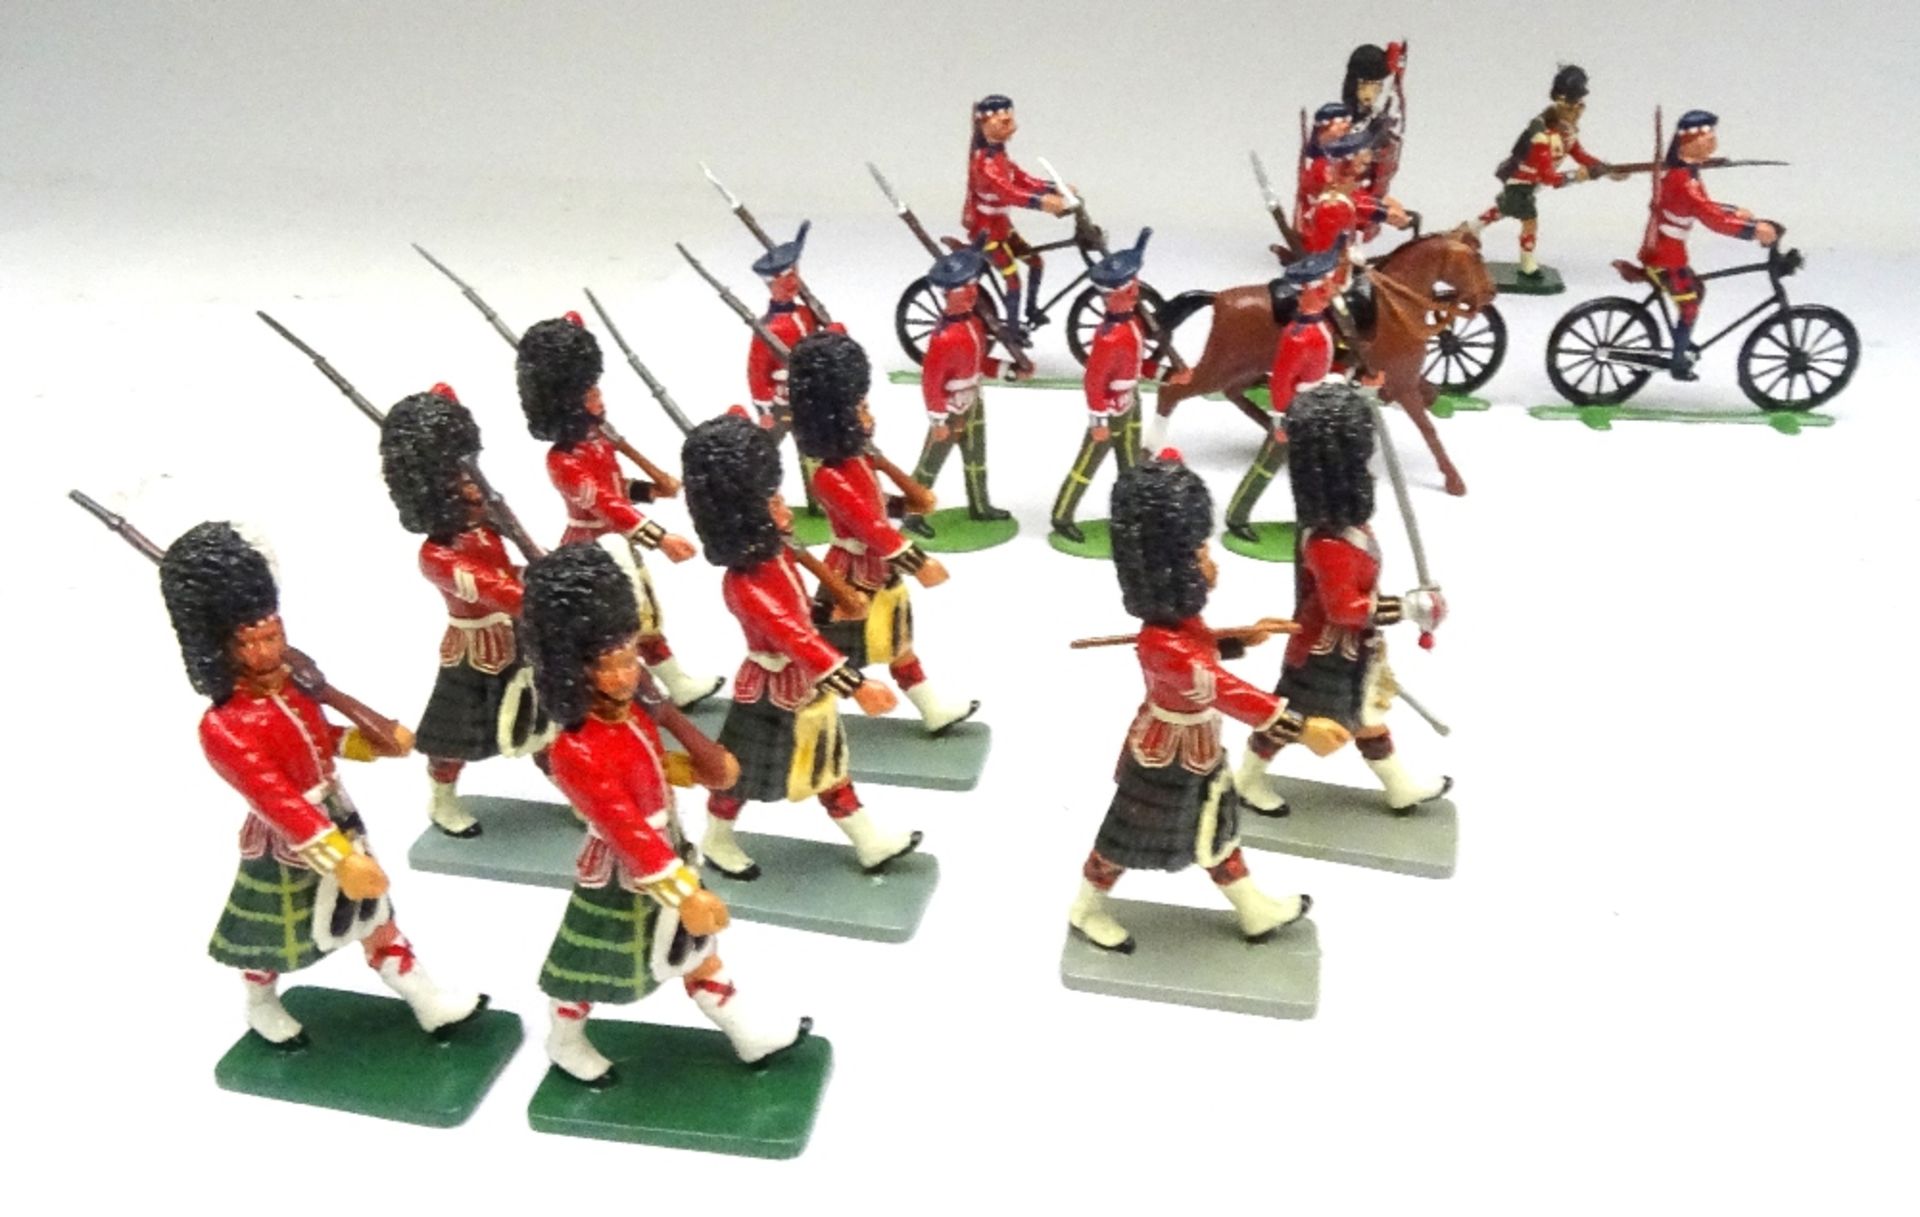 Highlander New Toy Soldiers - Image 3 of 7